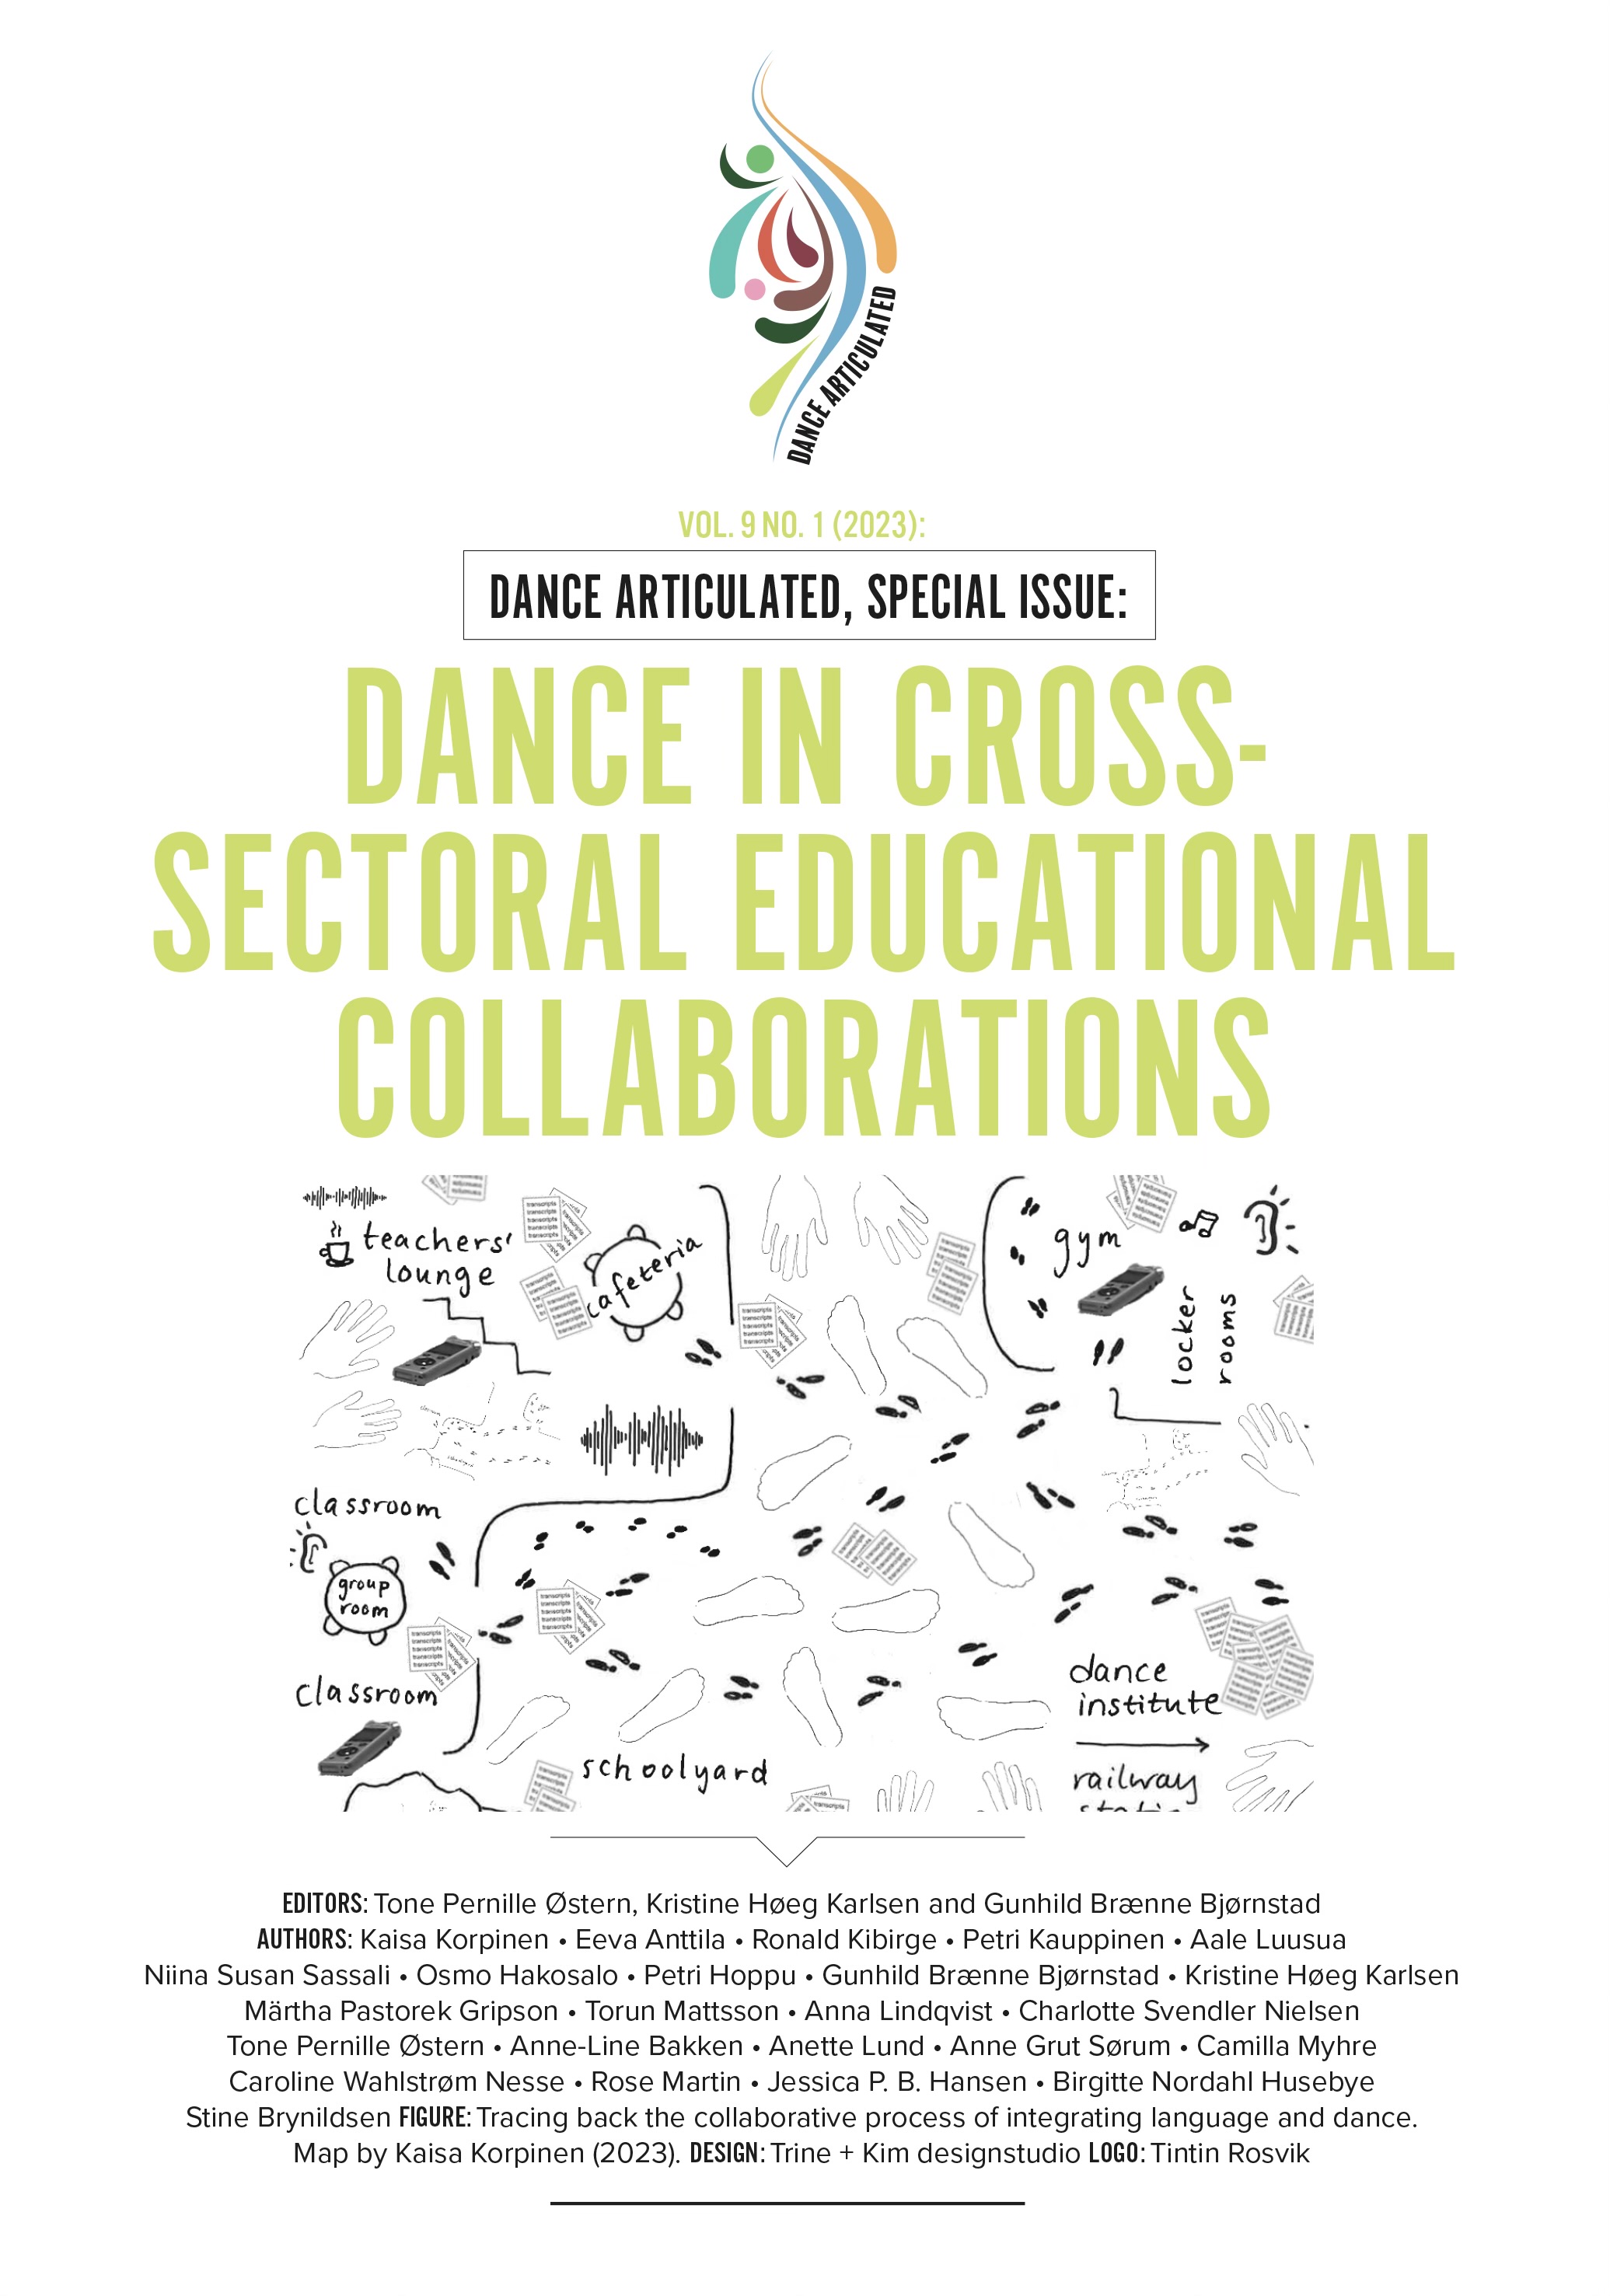 					View Vol. 9 No. 1 (2023): Dance in cross-sectoral educational collaborations
				